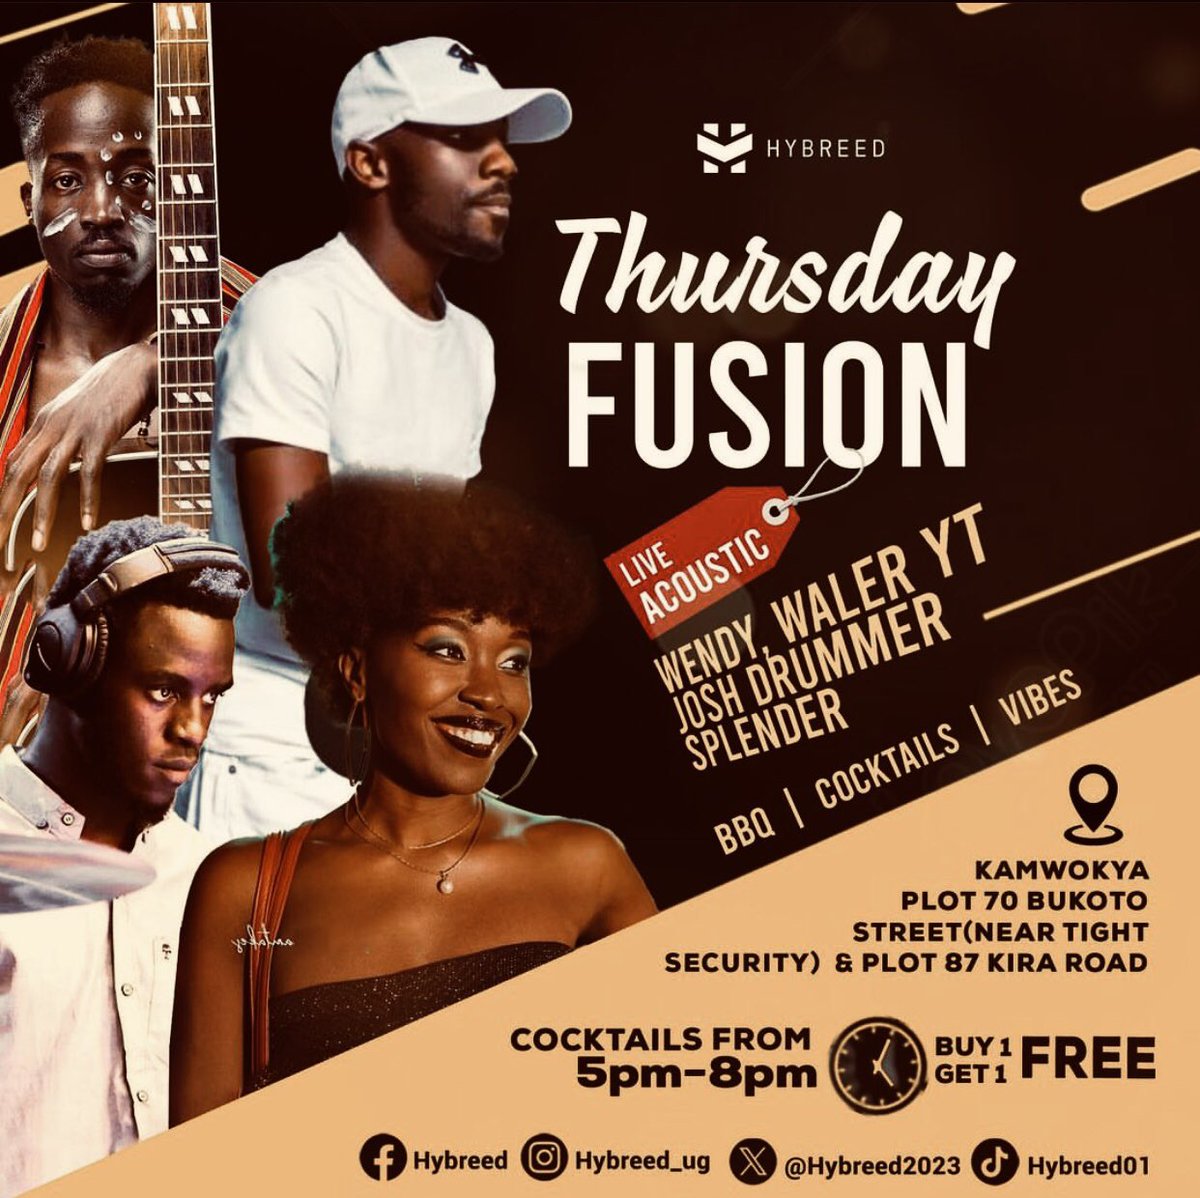 Choose you evening chill with us every single Thursday 💯🎶 it’s #ThursdayFusion 
We gat you covered 💯 

Call/WhatsApp: +256 743 333